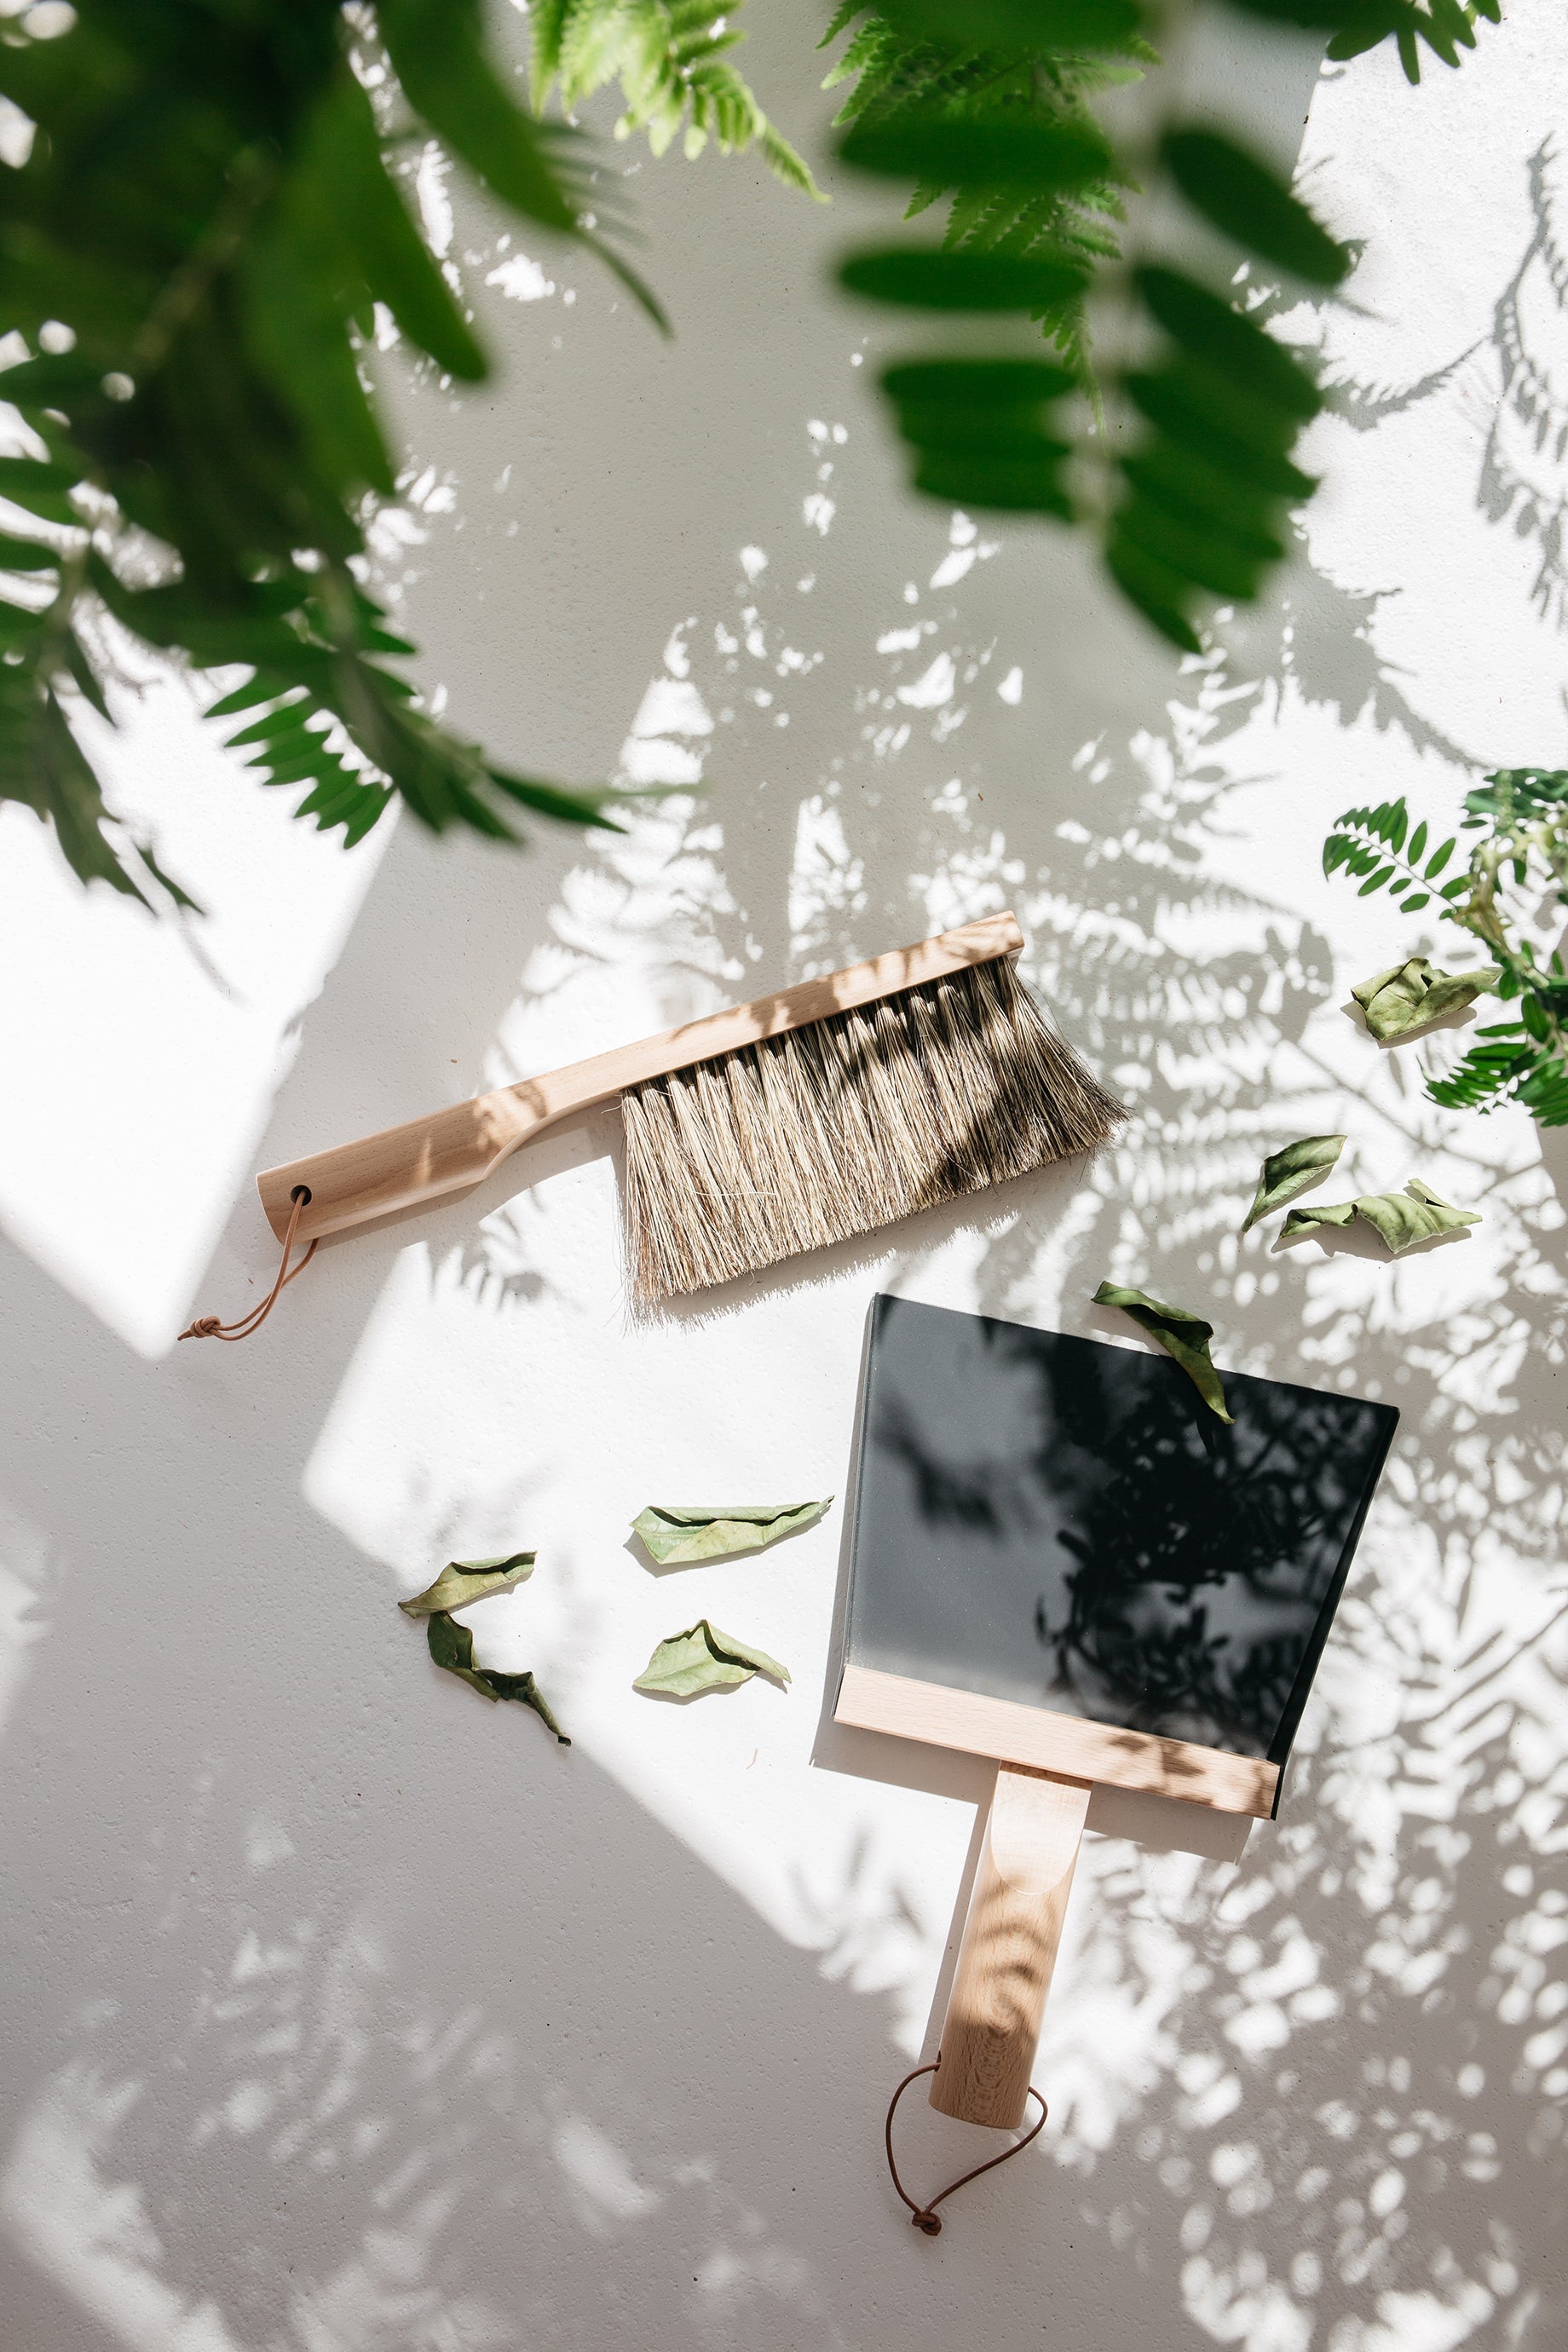 Andrée Jardin Mr. and Mrs. Clynk Dustpan & Natural Brush with Wall Hooks Set "Coffret" Gift Set Utilities Andrée Jardin Back in stock Brand_Andrée Jardin Home_Broom Sets Home_Household Cleaning New Arrivals balayette-design-clynk-nature-s2-3322_4e7d382d-7ce7-4e4d-b0b5-e37d5635c0c4